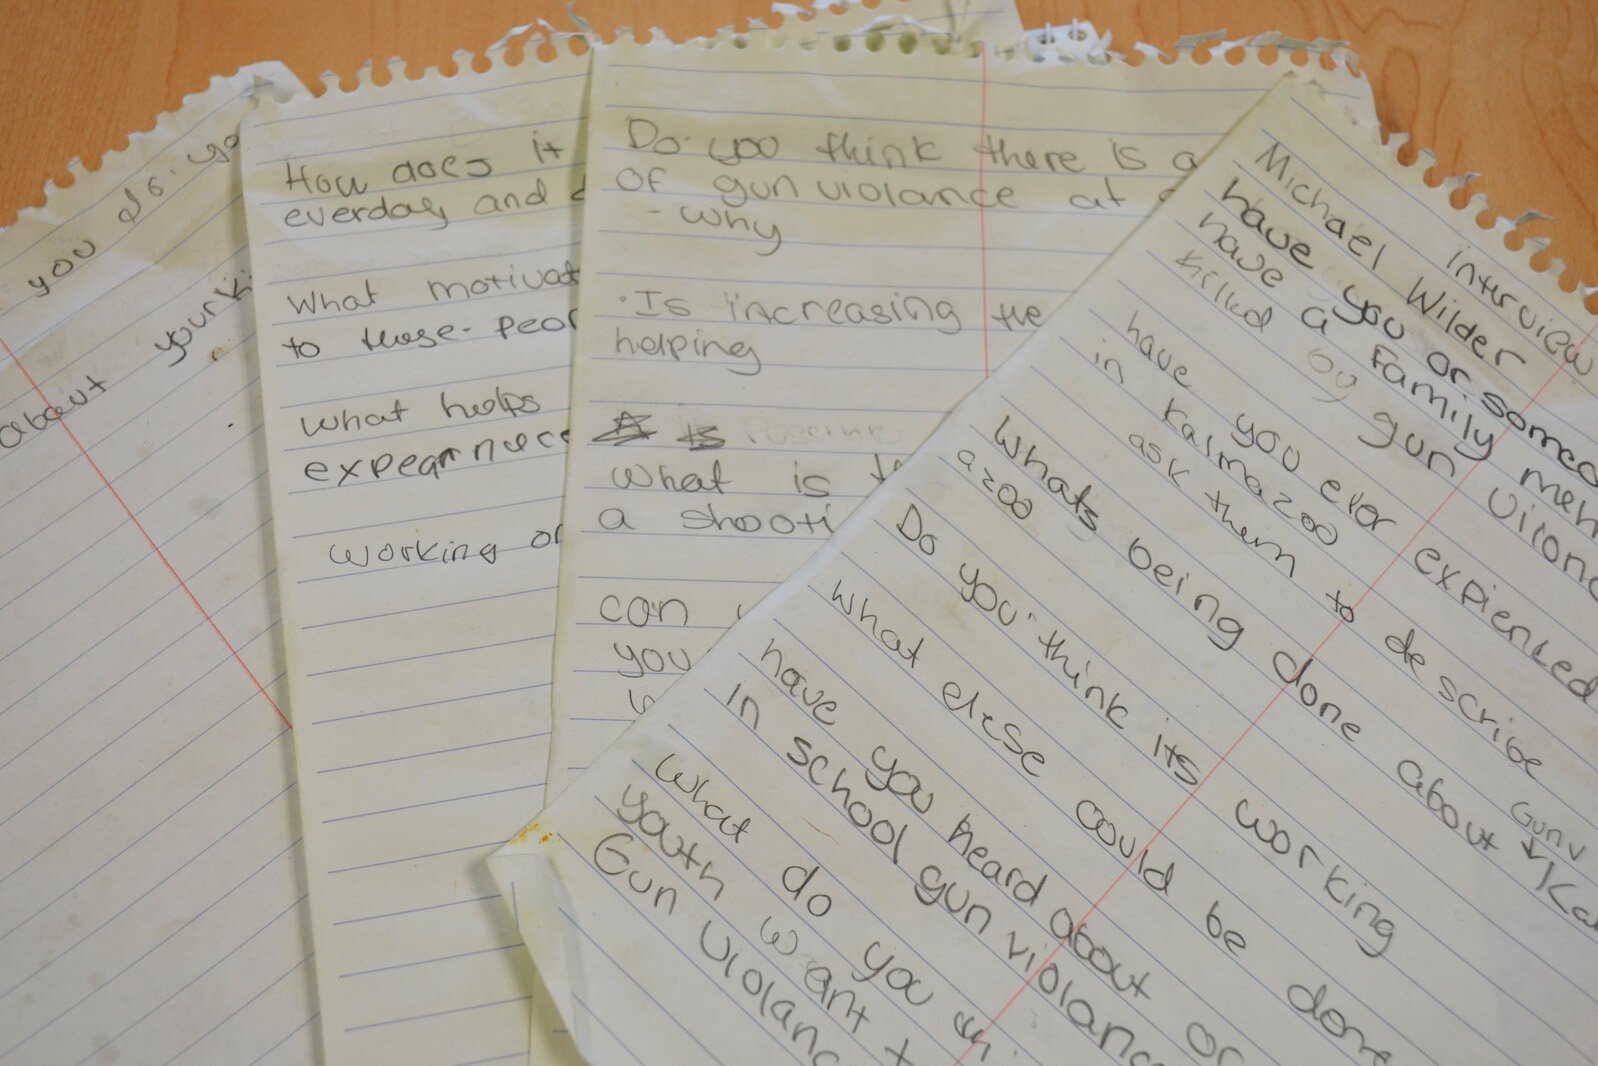 For this story, Regina Kibezi interviewed Michael Wilder about his work counteracting gun violence. Her notes are seen at the table where the interview took place. 